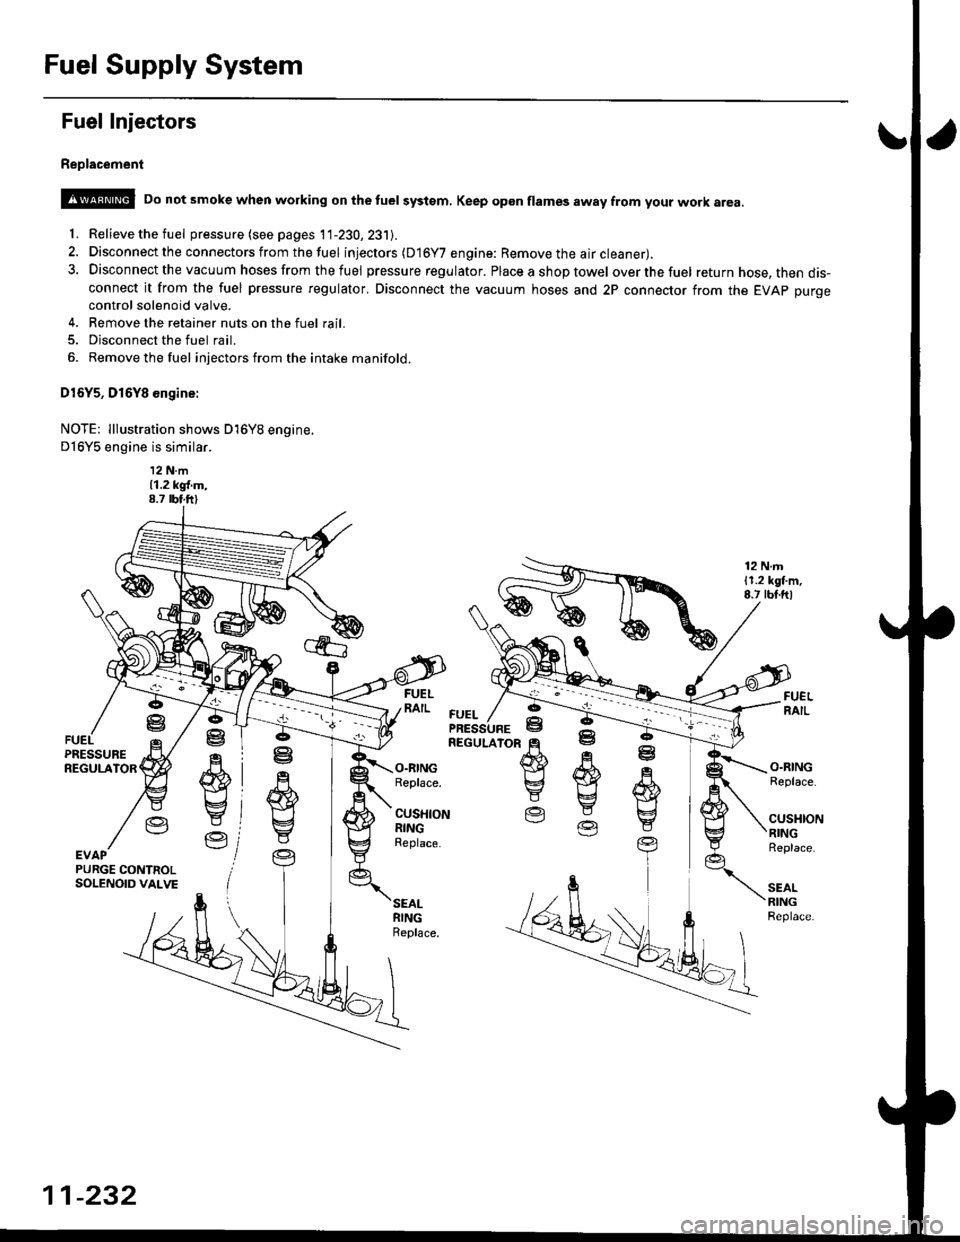 HONDA CIVIC 1996 6.G Service Manual Fuel Supply System
Fuel Injectors
Replacement
@ Do not smoke when working on the tuel systgm, Keep gp6n flames away from your work area
f. Relieve the fuel pressure (see pages 11-230,231J.
2. Disconn